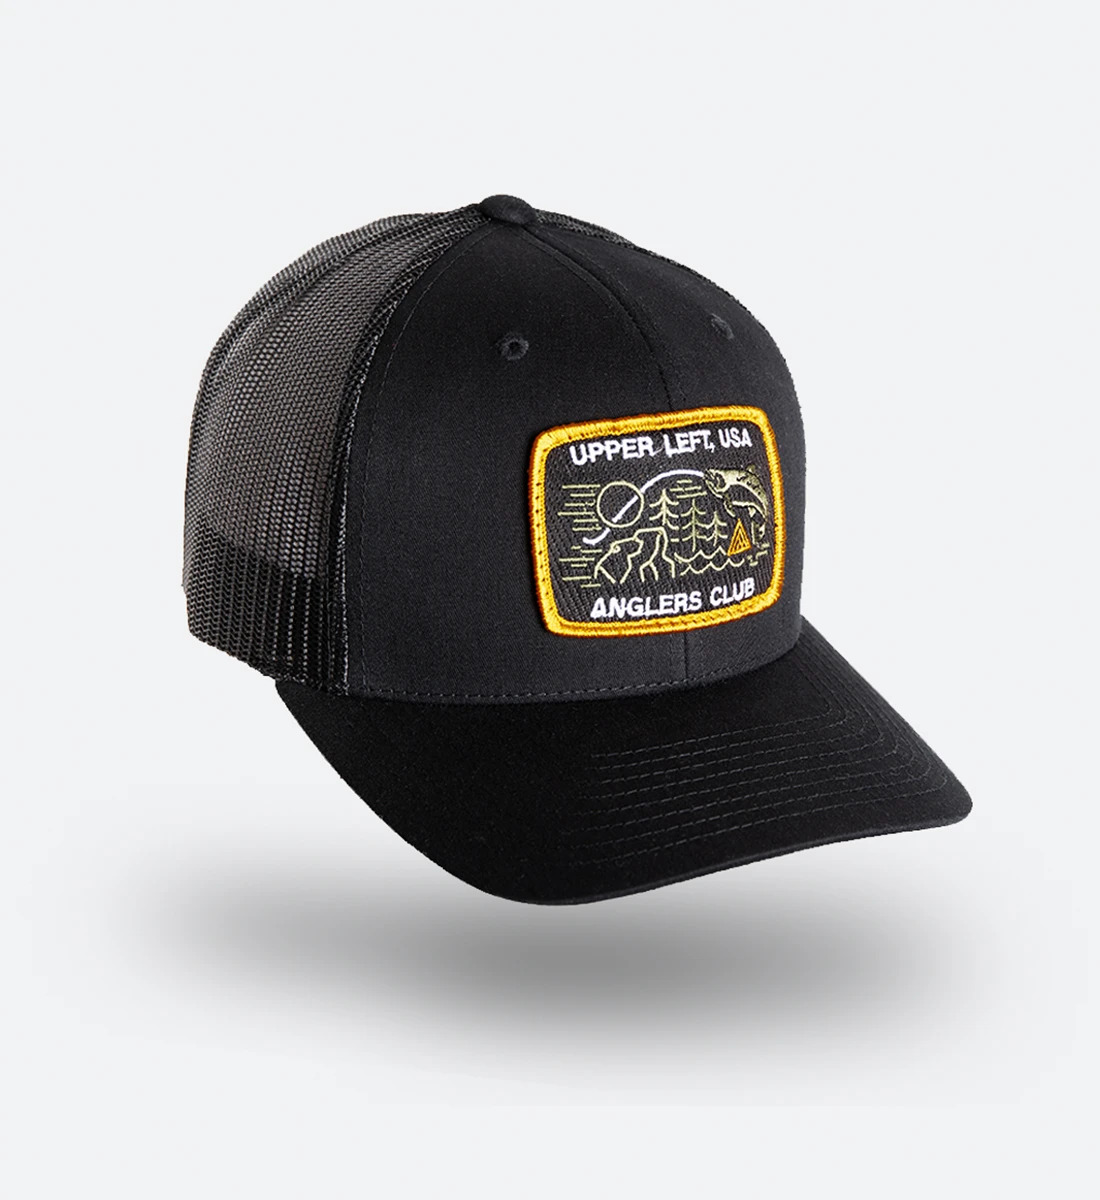 Embroidery Patches On Hats | Embroidery Shops